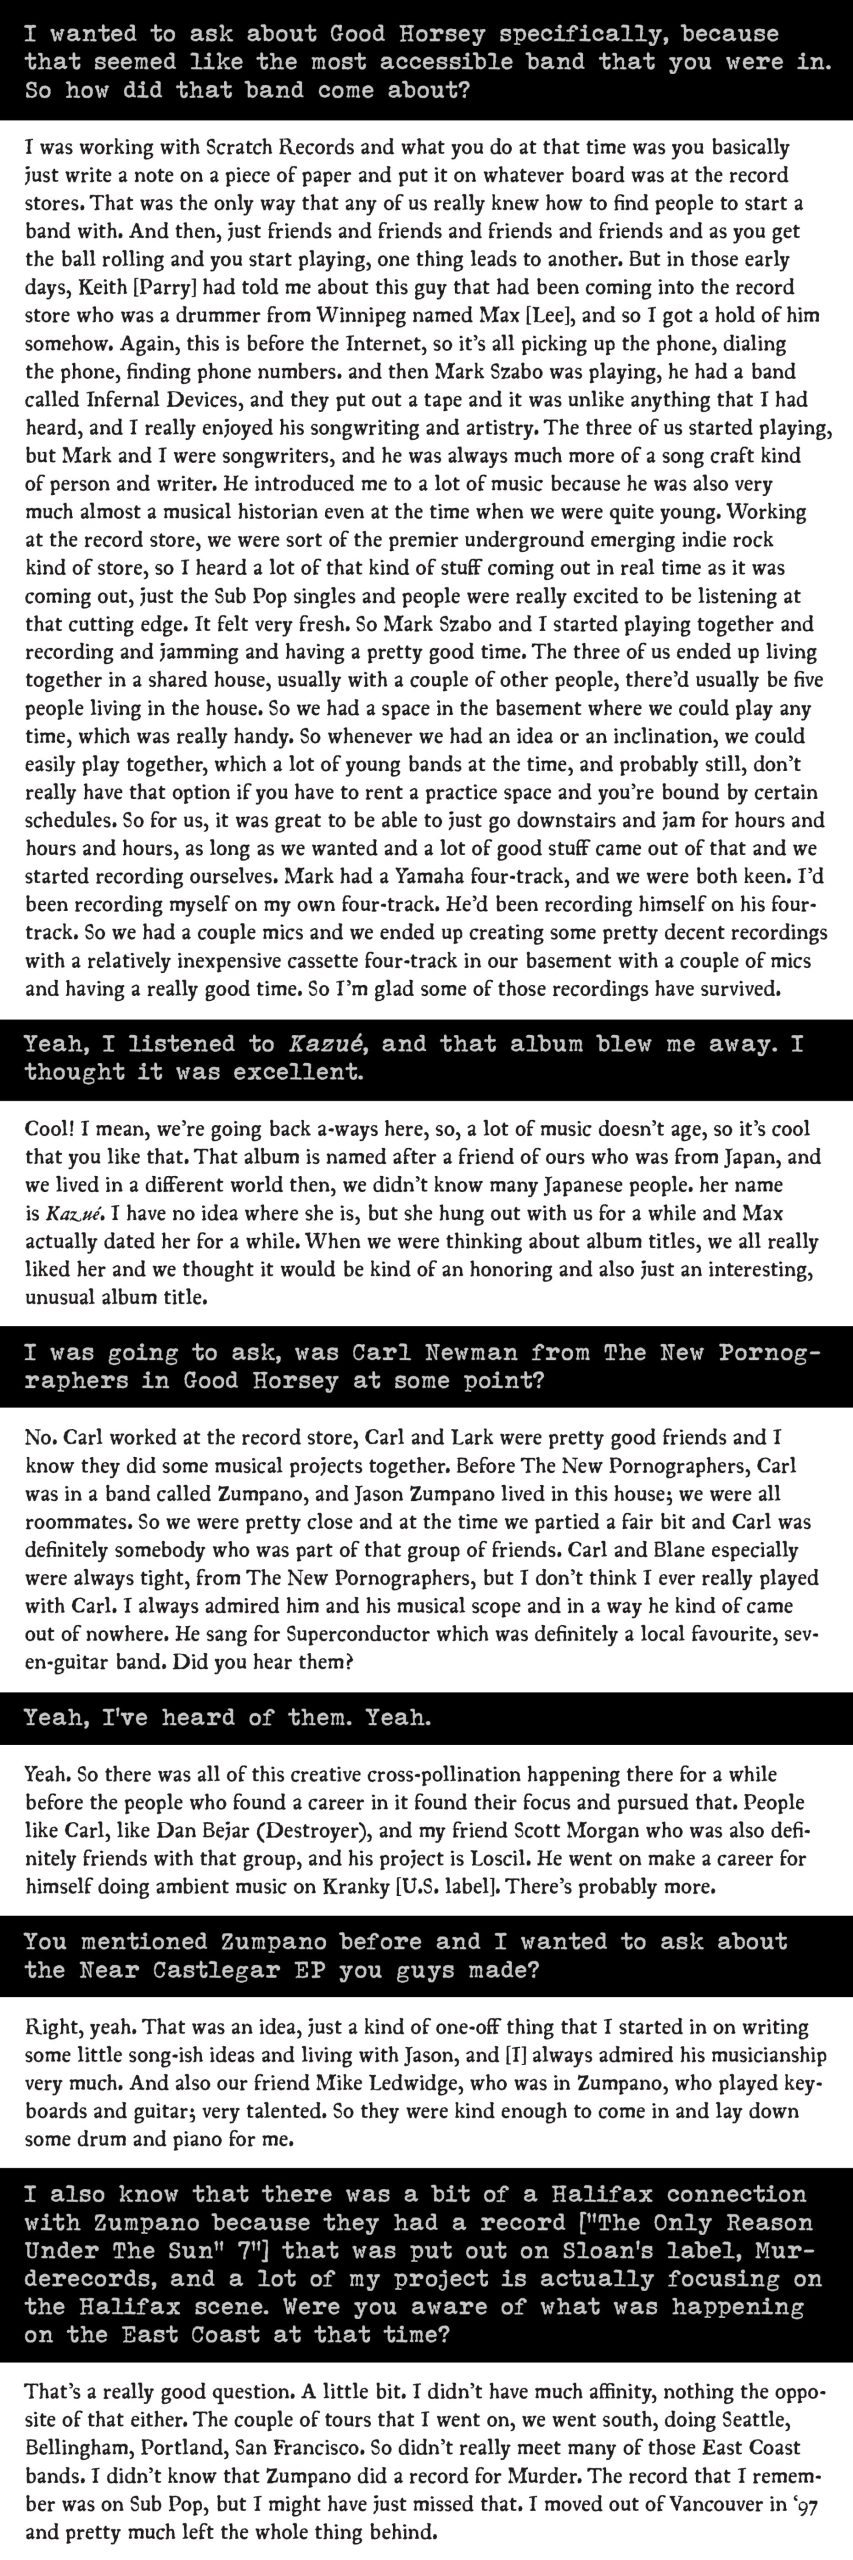 PDF of a long fold-out for an interview with Justice Schanfarber which reads: "I wanted to ask about Good Horsey specifically, because that seemed like the most accessible band that you were in. So how did that band come about? 

I was working with Scratch Records and what you do at that time was you basically just write a note on a piece of paper and put it on whatever board was at the record stores. That was the only way that any of us really knew how to find people to start a band with. And then, just friends and friends and friends and friends and as you get the ball rolling and you start playing, one thing leads to another. But in those early days, Keith [Parry] had told me about this guy that had been coming into the record store who was a drummer from Winnipeg named Max [Lee], and so I got a hold of him somehow. Again, this is before the Internet, so it’s all picking up the phone, dialing the phone, finding phone numbers. and then Mark Szabo was playing, he had a band called Infernal Devices, and they put out a tape and it was unlike anything that I had heard, and I really enjoyed his songwriting and artistry. The three of us started playing, but Mark and I were songwriters, and he was always much more of a song craft kind of person and writer. He introduced me to a lot of music because he was also very much almost a musical historian even at the time when we were quite young. Working at the record store, we were sort of the premier underground emerging indie rock kind of store, so I heard a lot of that kind of stuff coming out in real time as it was coming out, just the Sub Pop singles and people were really excited to be listening at that cutting edge. It felt very fresh. So Mark Szabo and I started playing together and recording and jamming and having a pretty good time. The three of us ended up living together in a shared house, usually with a couple of other people, there’d usually be five people living in the house. So we had a space in the basement where we could play any time, which was really handy. So whenever we had an idea or an inclination, we could easily play together, which a lot of young bands at the time, and probably still, don’t really have that option if you have to rent a practice space and you’re bound by certain schedules. So for us, it was great to be able to just go downstairs and jam for hours and hours and hours, as long as we wanted and a lot of good stuff came out of that and we started recording ourselves. Mark had a Yamaha four-track, and we were both keen. I’d been recording myself on my own four-track. He’d been recording himself on his four-track. So we had a couple mics and we ended up creating some pretty decent recordings with a relatively inexpensive cassette four-track in our basement with a couple of mics and having a really good time. So I’m glad some of those recordings have survived.

Yeah, I listened to Kazué, and that album blew me away. I thought it was excellent.

Cool! I mean, we’re going back a-ways here, so, a lot of music doesn’t age, so it’s cool that you like that. That album is named after a friend of ours who was from Japan, and we lived in a different world then, we didn’t know many Japanese people. her name is Kazué. I have no idea where she is, but she hung out with us for a while and Max actually dated her for a while. When we were thinking about album titles, we all really liked her and we thought it would be kind of an honoring and also just an interesting, unusual album title.

I was going to ask, was Carl Newman from The New Pornographers in Good Horsey at some point?

No. Carl worked at the record store, Carl and Lark were pretty good friends and I know they did some musical projects together. Before The New Pornographers, Carl was in a band called Zumpano, and Jason Zumpano lived in this house; we were all roommates. So we were pretty close and at the time we partied a fair bit and Carl was definitely somebody who was part of that group of friends. Carl and Blane especially were always tight, from The New Pornographers, but I don’t think I ever really played with Carl. I always admired him and his musical scope and in a way he kind of came out of nowhere. He sang for Superconductor which was definitely a local favourite, seven-guitar band. Did you hear them?

Yeah, I’ve heard of them. Yeah.

Yeah. So there was all of this creative cross-pollination happening there for a while before the people who found a career in it found their focus and pursued that. People like Carl, like Dan Bejar (Destroyer), and my friend Scott Morgan who was also definitely friends with that group, and his project is Loscil. He went on make a career for himself doing ambient music on Kranky [U.S. label]. There’s probably more.

You mentioned Zumpano before and I wanted to ask about the Near Castlegar EP you guys made?

Right, yeah. That was an idea, just a kind of one-off thing that I started in on writing some little song-ish ideas and living with Jason, and [I] always admired his musicianship very much. And also our friend Mike Ledwidge, who was in Zumpano, who played keyboards and guitar; very talented. So they were kind enough to come in and lay down some drum and piano for me. 

I also know that there was a bit of a Halifax connection with Zumpano because they had a record [“The Only Reason Under The Sun” 7”] that was put out on Sloan’s label, Murderecords, and a lot of my project is actually focusing on the Halifax scene. Were you aware of what was happening on the East Coast at that time?

That’s a really good question. A little bit. I didn’t have much affinity, nothing the opposite of that either. The couple of tours that I went on, we went south, doing Seattle, Bellingham, Portland, San Francisco. So didn’t really meet many of those East Coast bands. I didn’t know that Zumpano did a record for Murder. The record that I remember was on Sub Pop, but I might have just missed that. I moved out of Vancouver in ‘97 and pretty much left the whole thing behind."